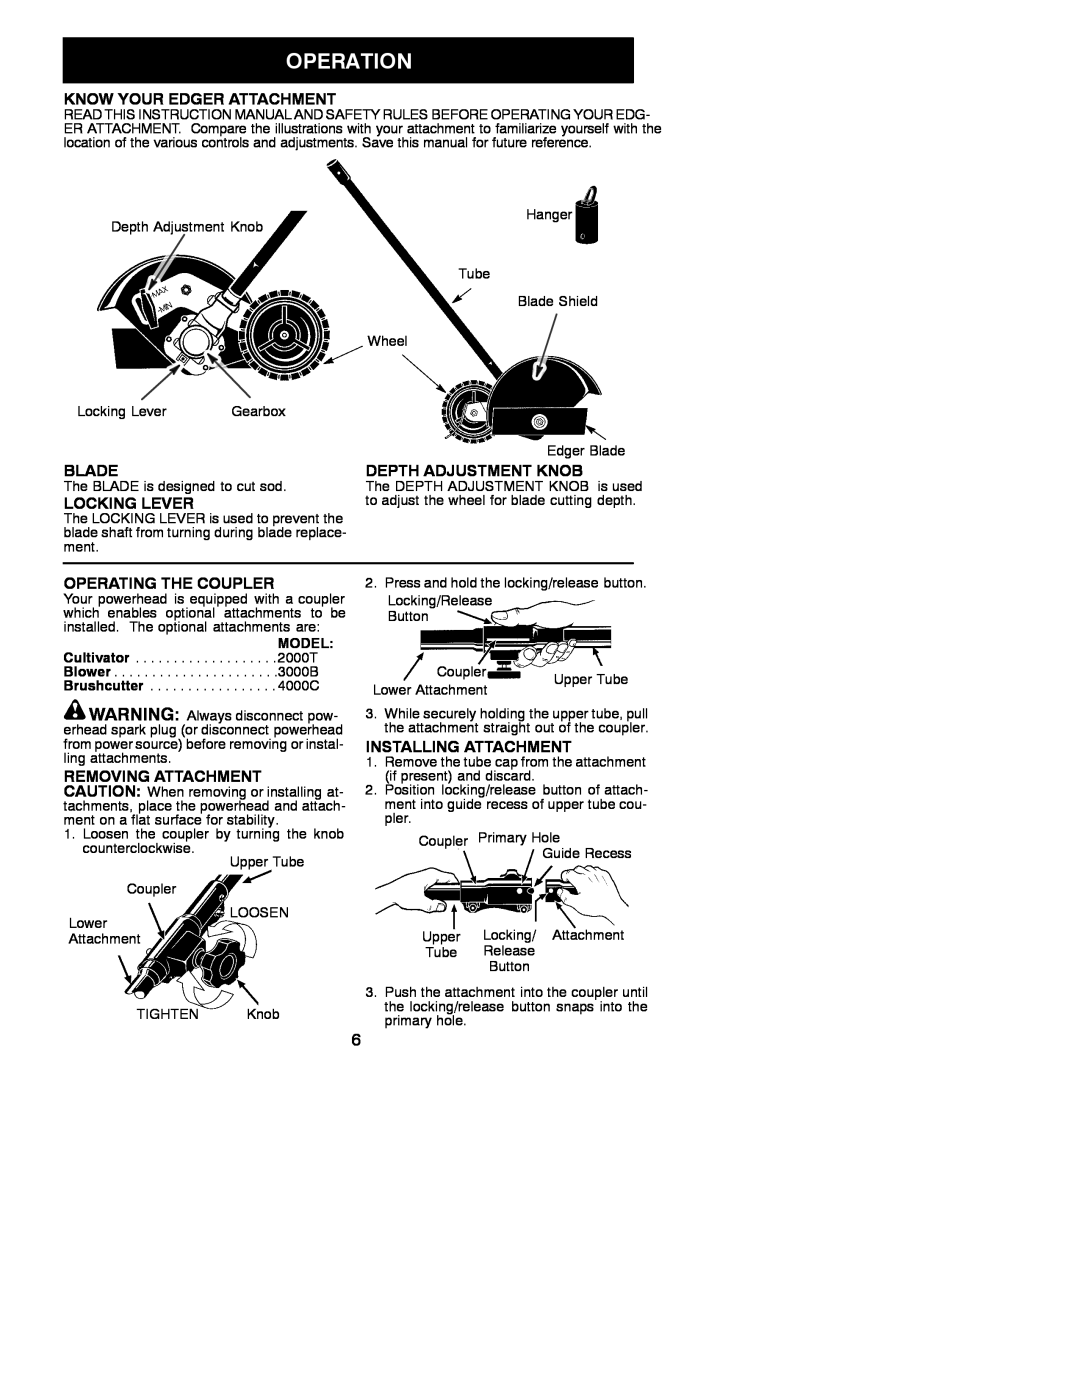 Weed Eater 530086783 Know Your Edger Attachment, Blade, Depth Adjustment Knob, Locking Lever, Operating The Coupler 